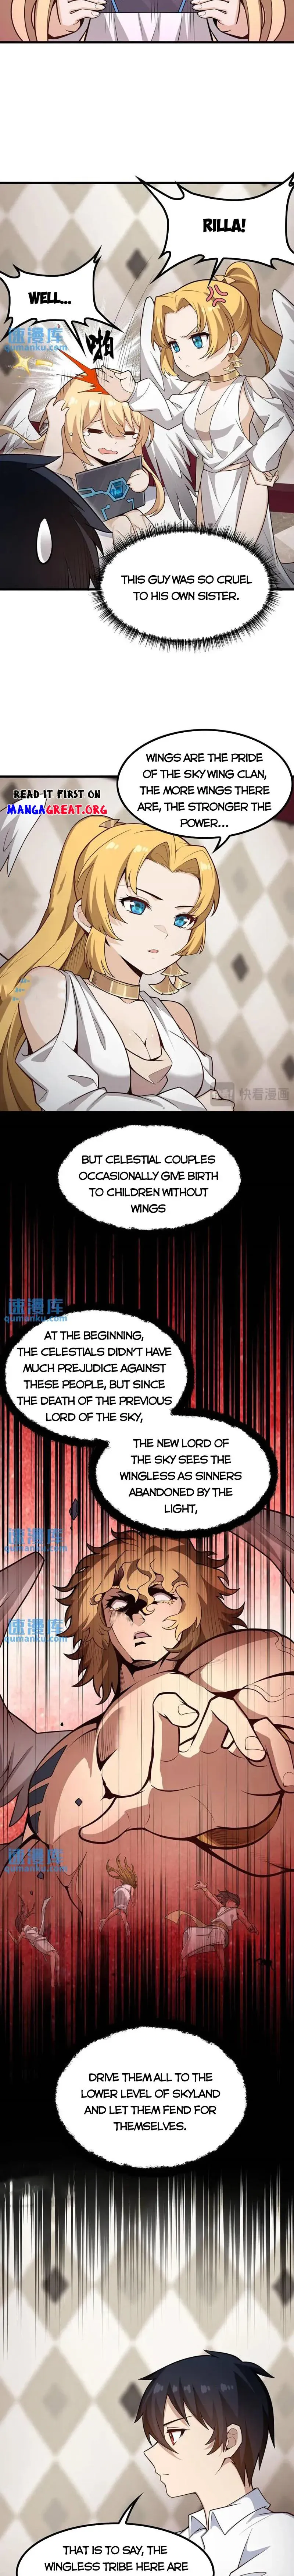 Infinite Apostles and Twelve War Girls Chapter 375 page 5